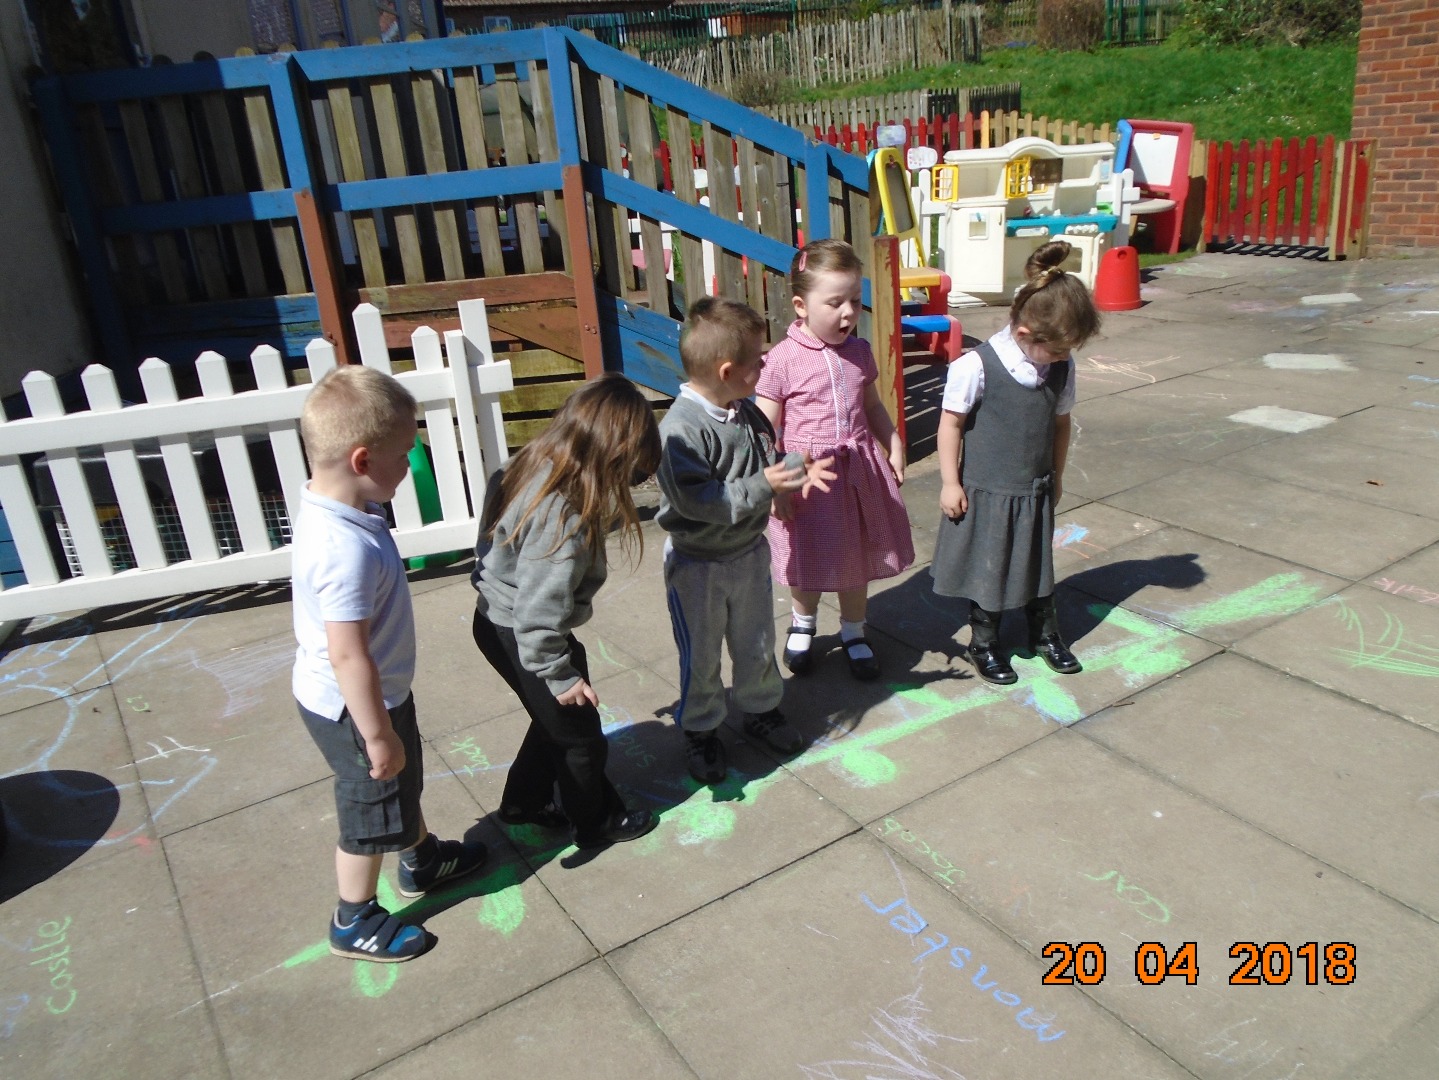 19 4 18 Writing about J and Beanstalk with chalk ..JPG